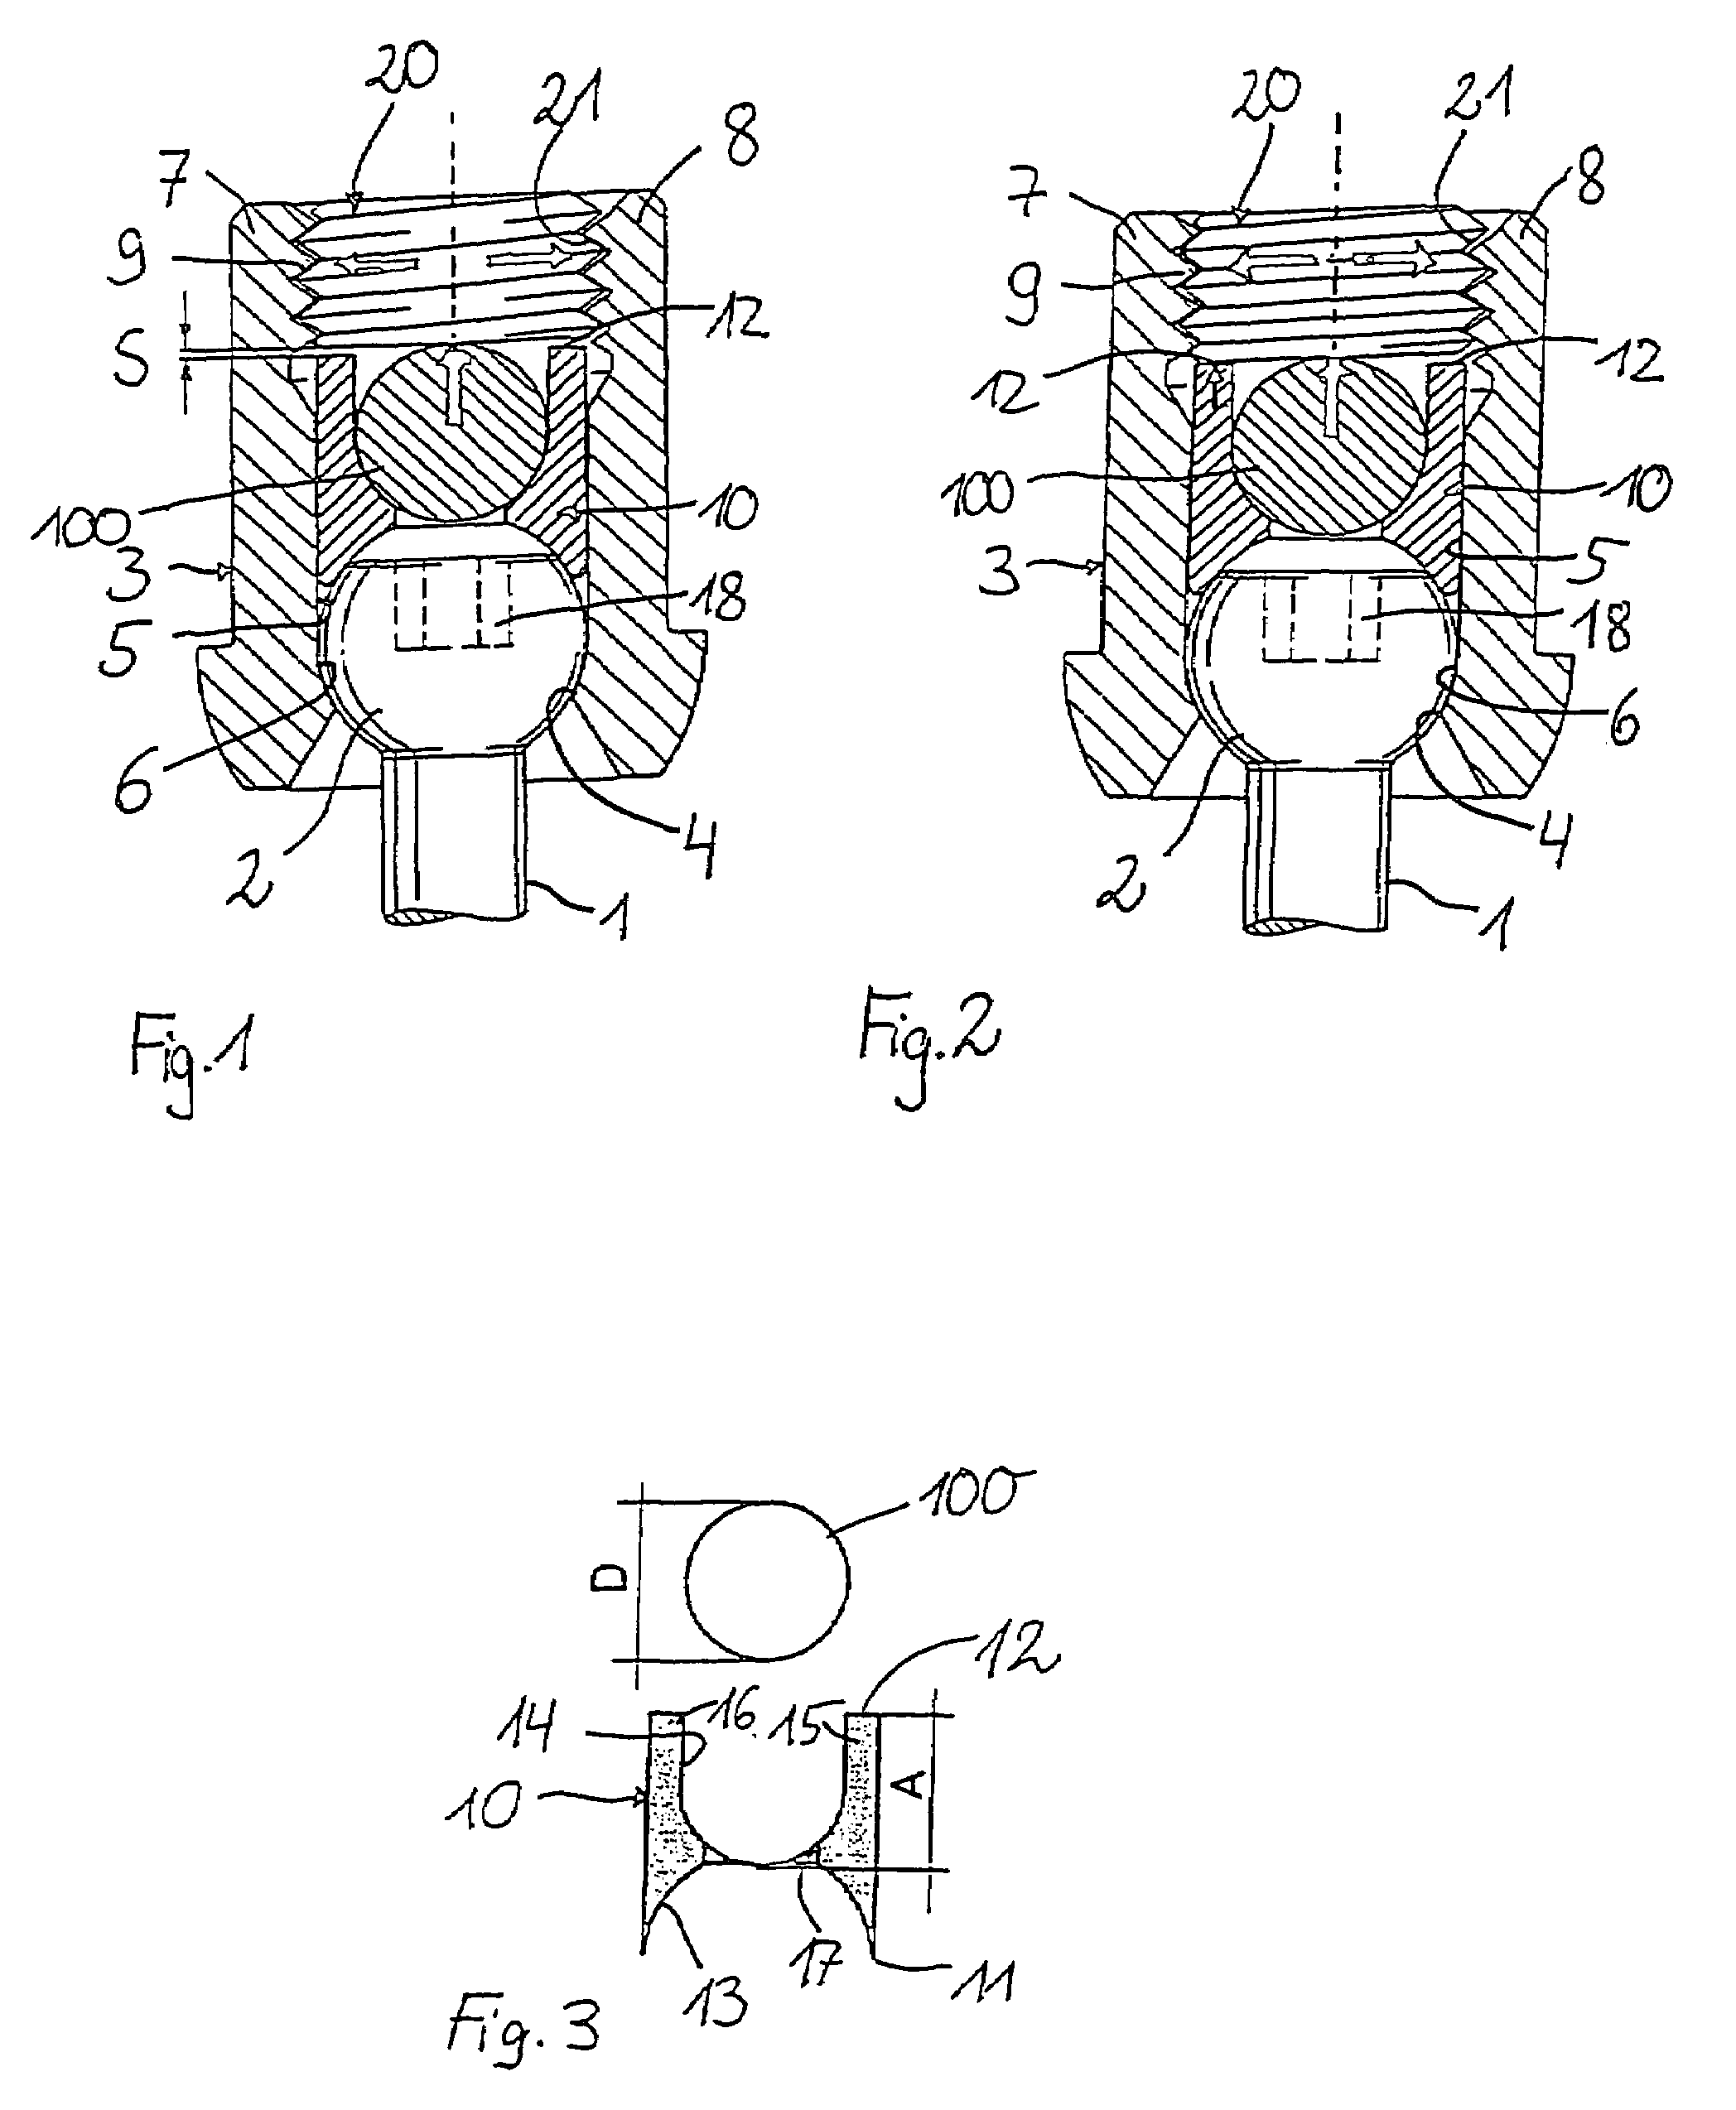 Implant having a shaft and a hold element connected therewith for connecting with a rod